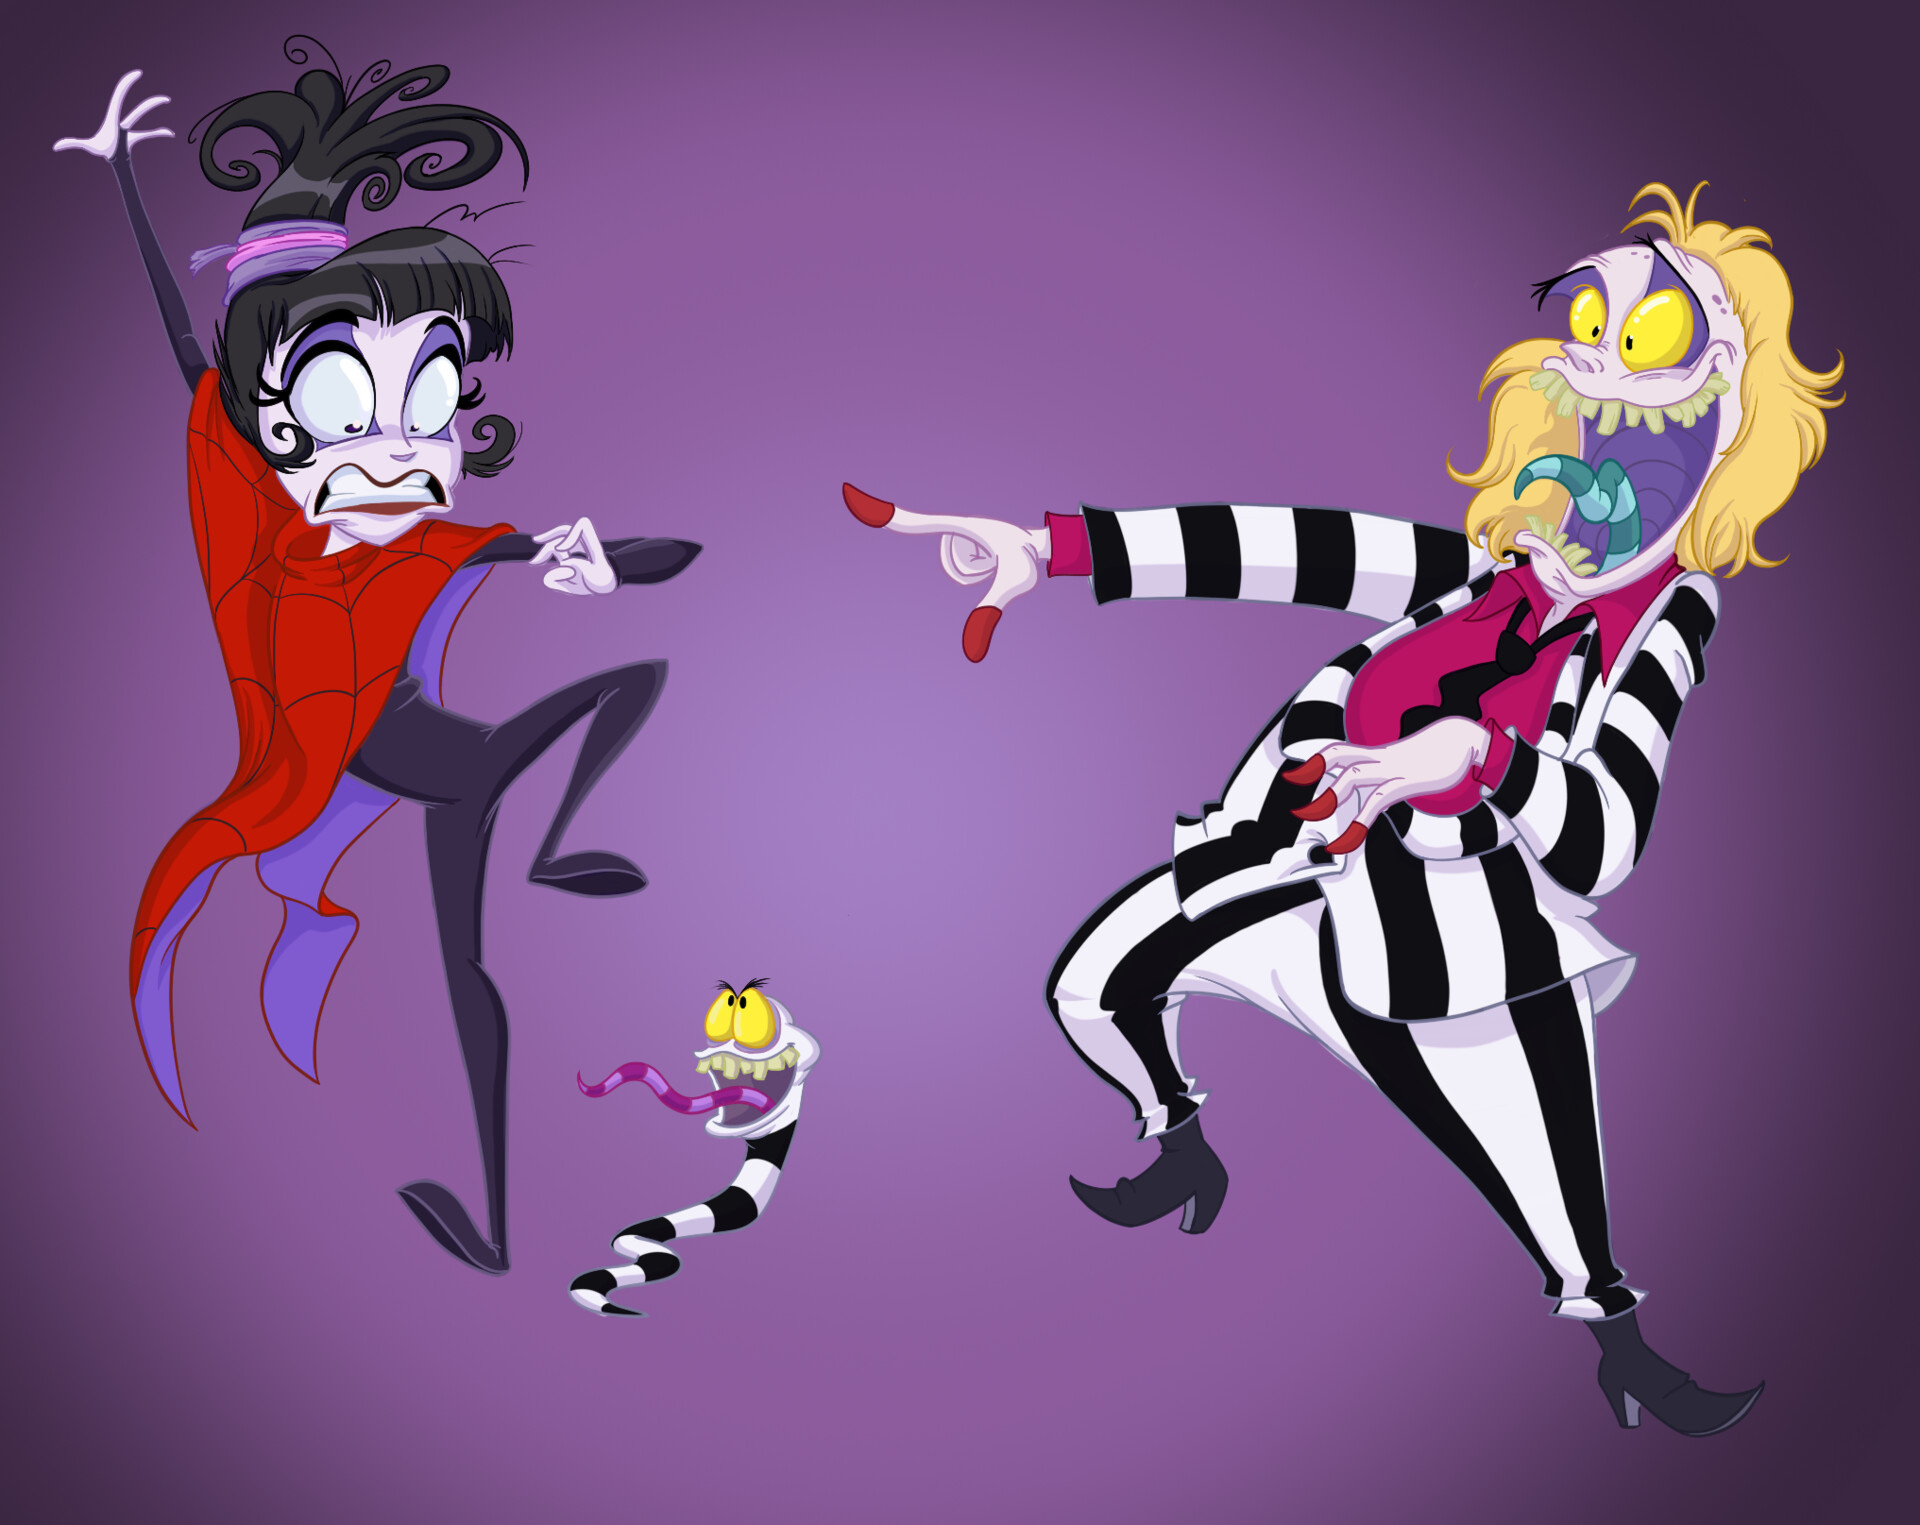 Beetlejuice (Cartoon): The oldest son of Gnat and Bee Juice, known throughout the Neitherworld as a prankster. 1920x1530 HD Wallpaper.